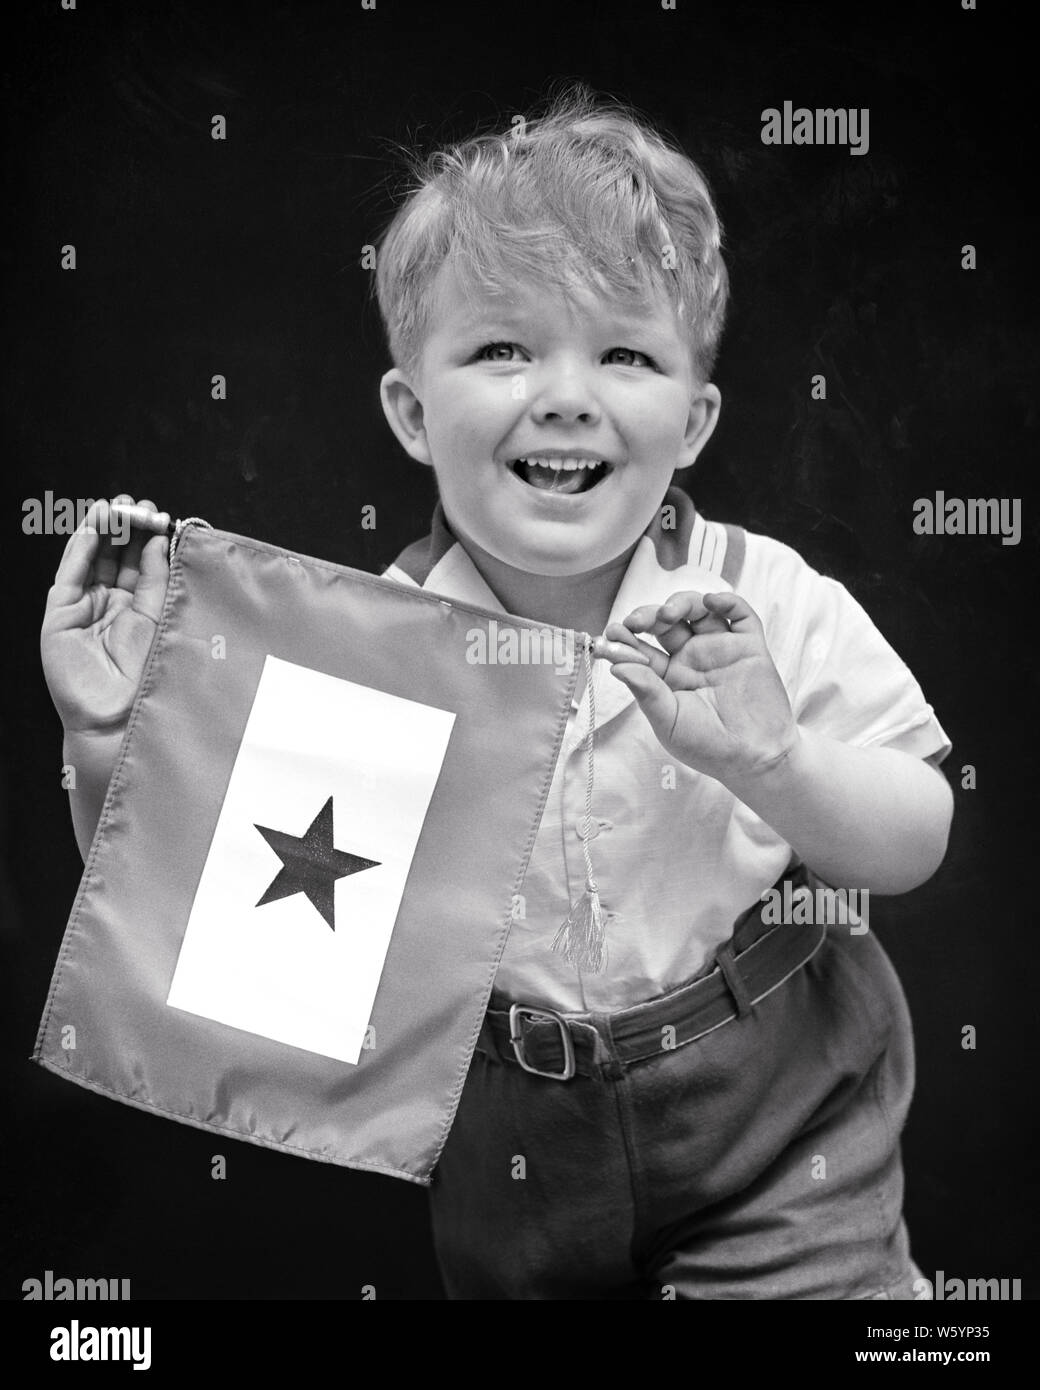 1940s PROUD SMILING BOY RELATIVE HOLDING BLUE STAR SERVICE BANNER INDICATING A FAMILY MEMBER SERVING IN US MILITARY WORLD WAR II - d1665 HAR001 HARS FACIAL COMMUNICATION INFORMATION SONS PLEASED FAMILIES JOY LIFESTYLE HISTORY CELEBRATION PROUD DISPLAY STUDIO SHOT RURAL HOME LIFE UNITED STATES COPY SPACE HALF-LENGTH INSPIRATION UNITED STATES OF AMERICA MALES RISK EXPRESSIONS B&W NORTH AMERICA EYE CONTACT NORTH AMERICAN CHEERFUL STRENGTH COURAGE PRIDE WORLD WAR II IN SMILES UNIFORMS CONCEPTUAL JOYFUL STYLISH FAMILY MEMBERS JUVENILES MEMBER RELATIVE TOGETHERNESS BLACK AND WHITE Stock Photo